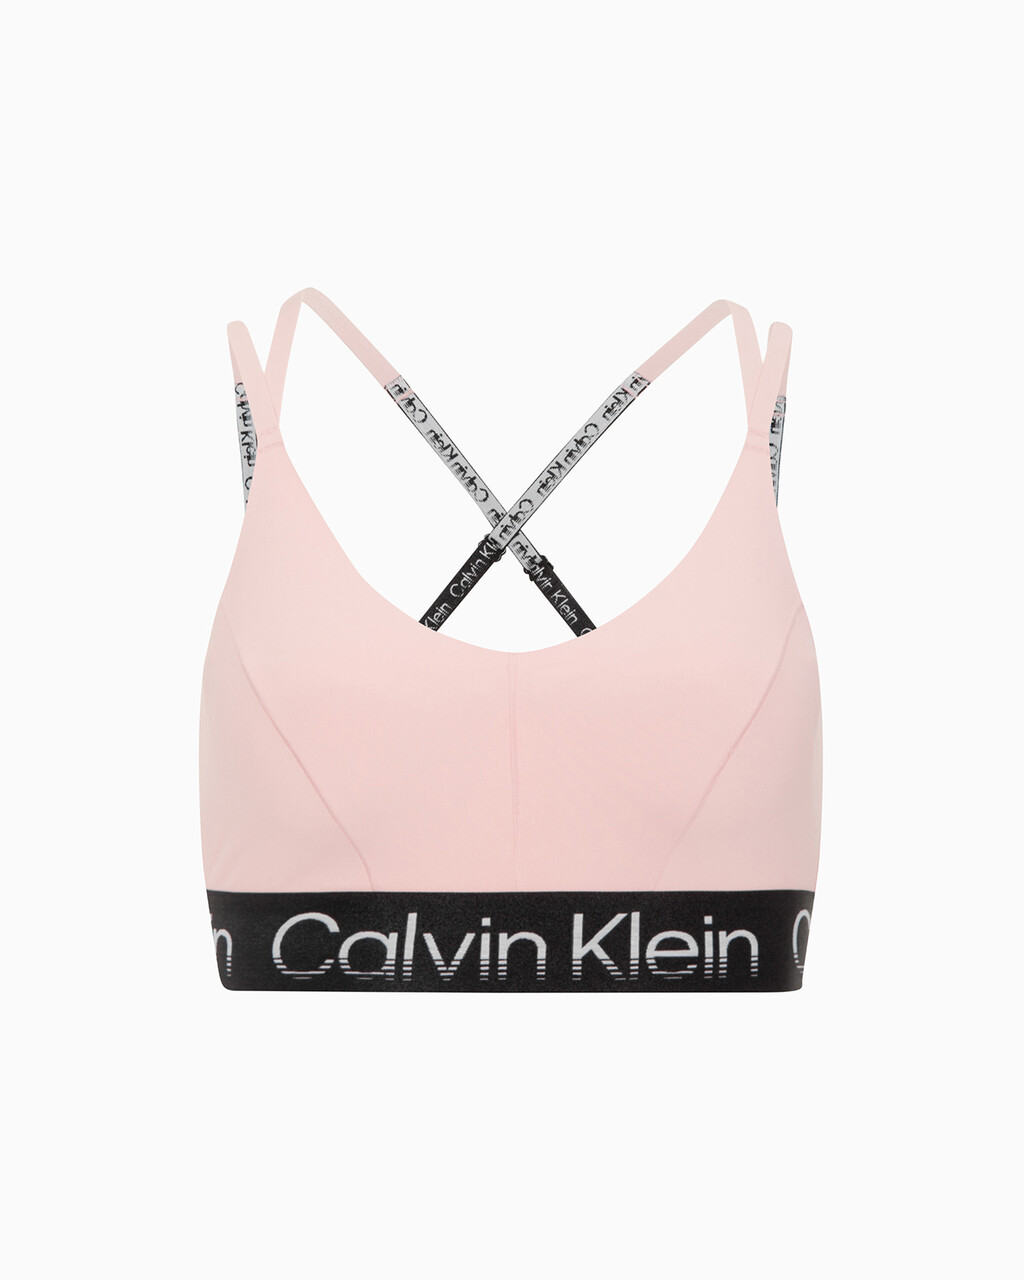 ACTIVE ICON HIGH SUPPORT BRA, SILVER PINK, hi-res